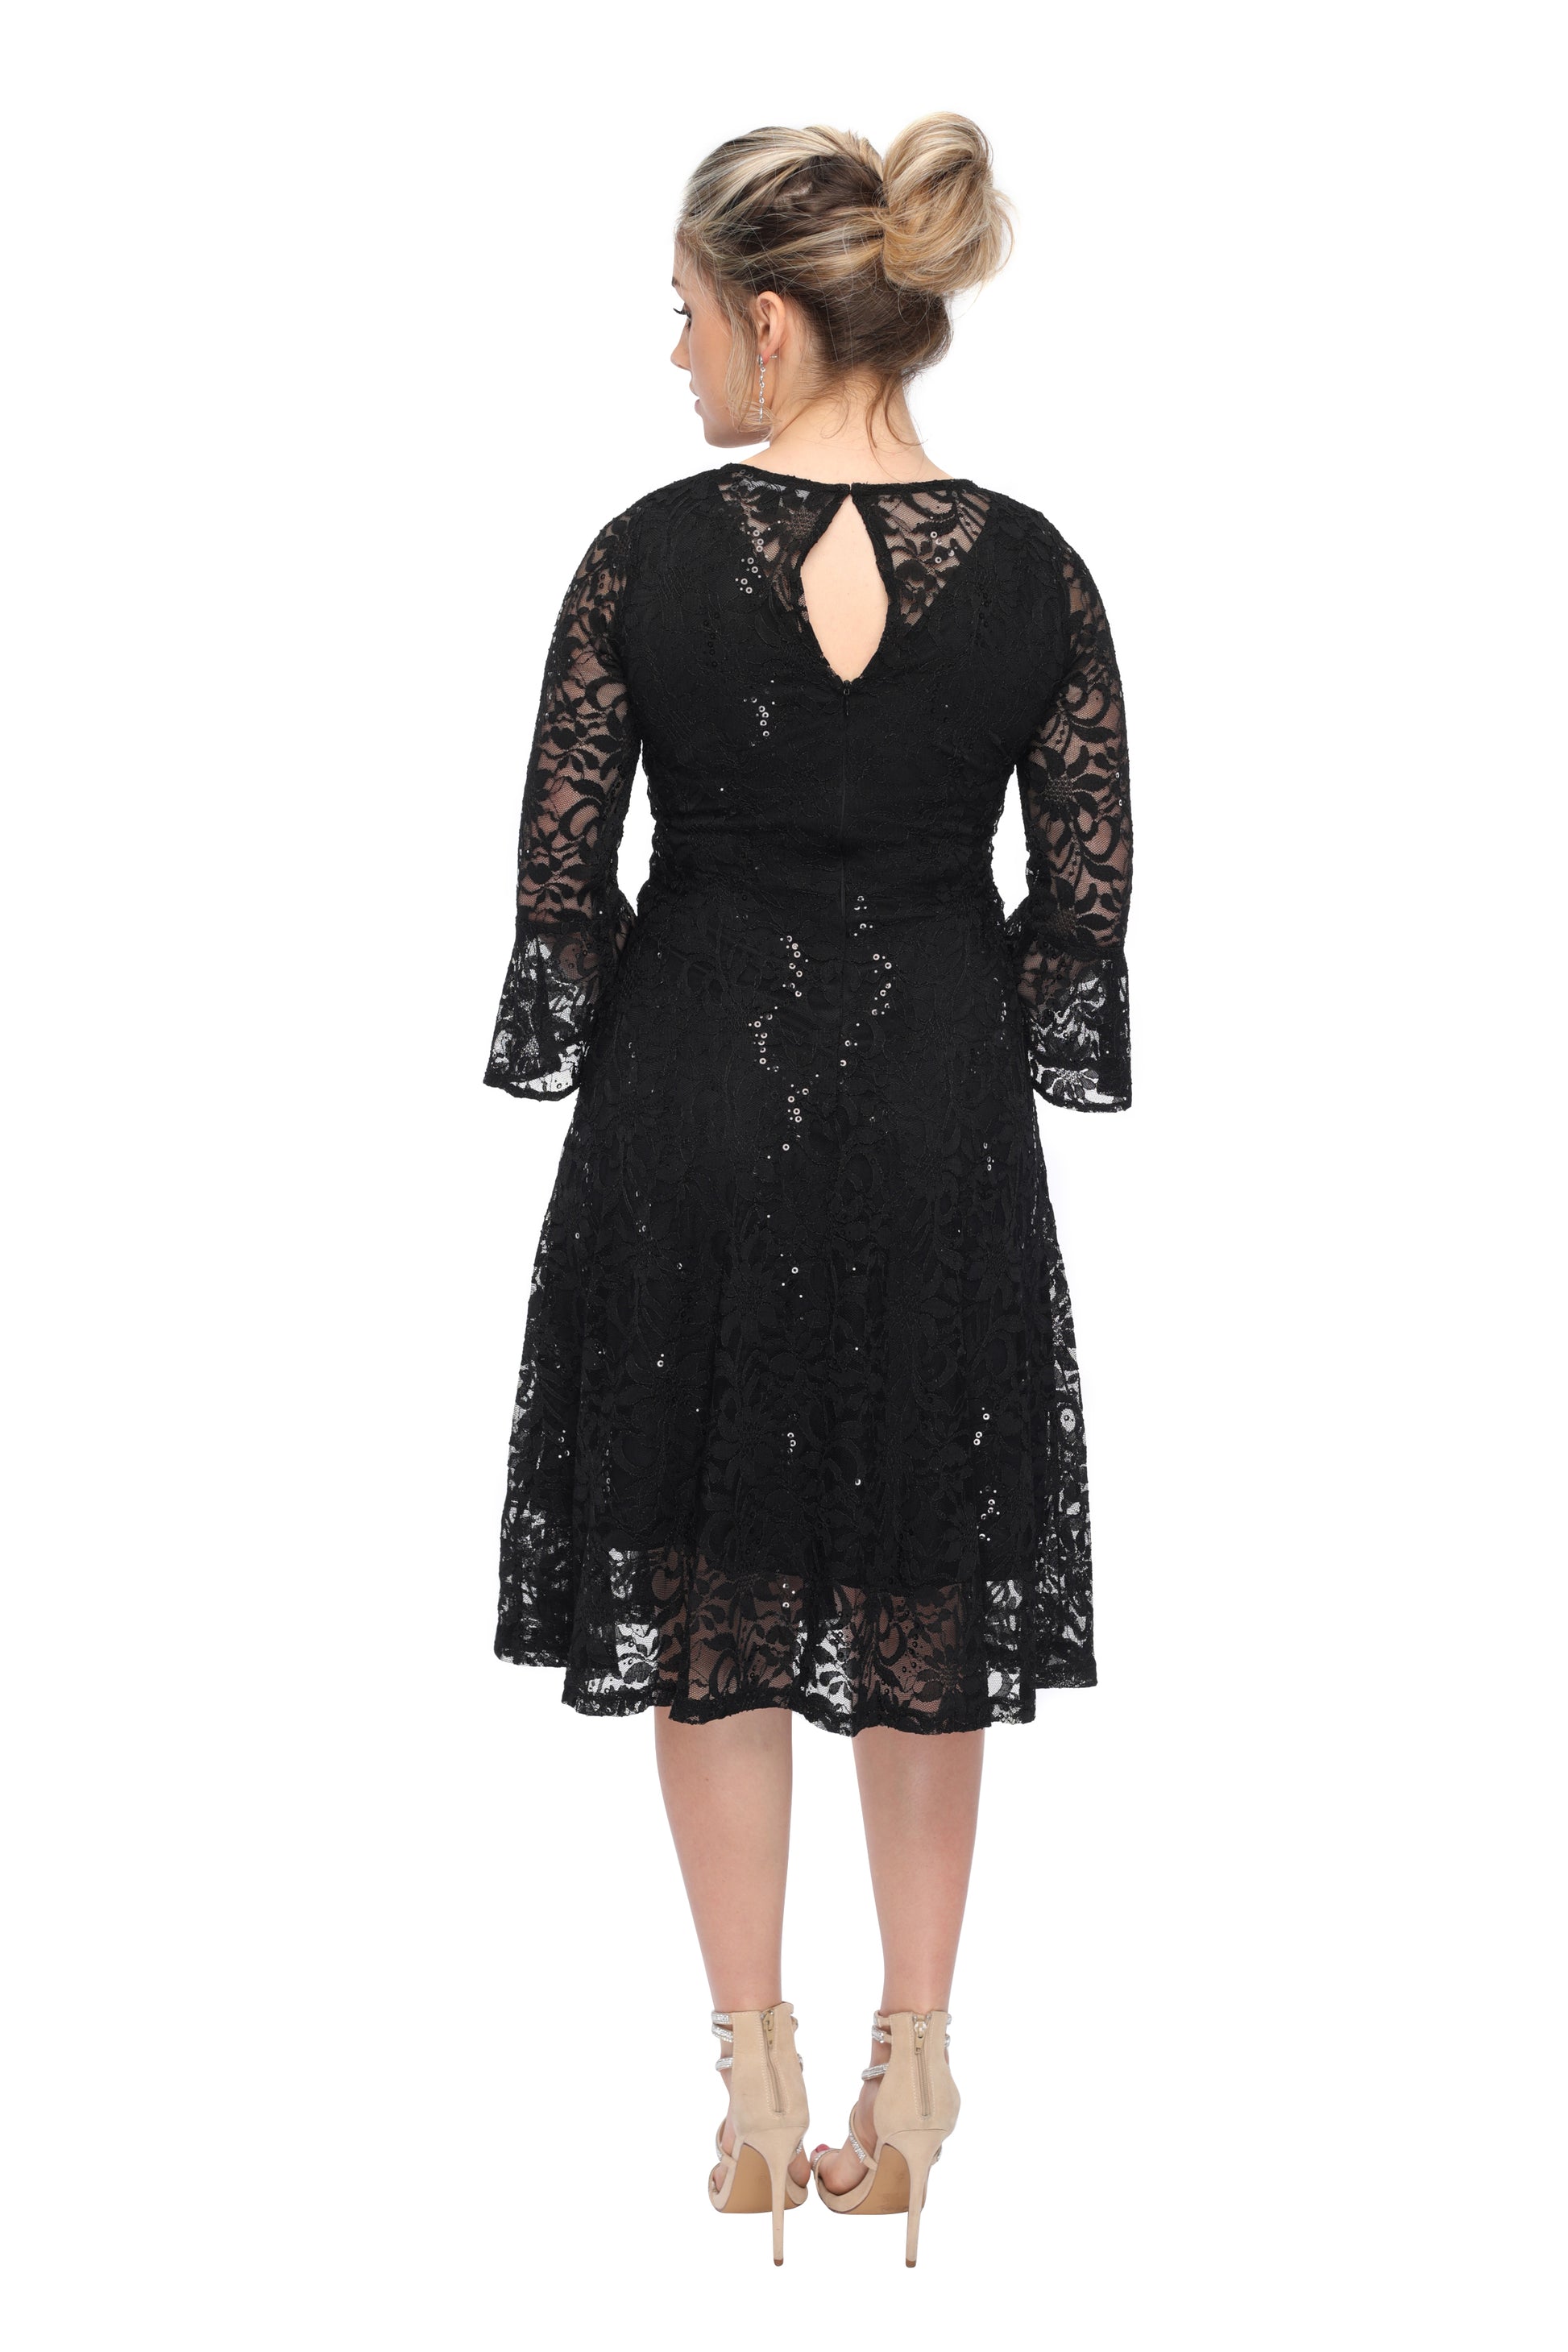 Order Women's Sequin Fit and Flare Party Lace Dress